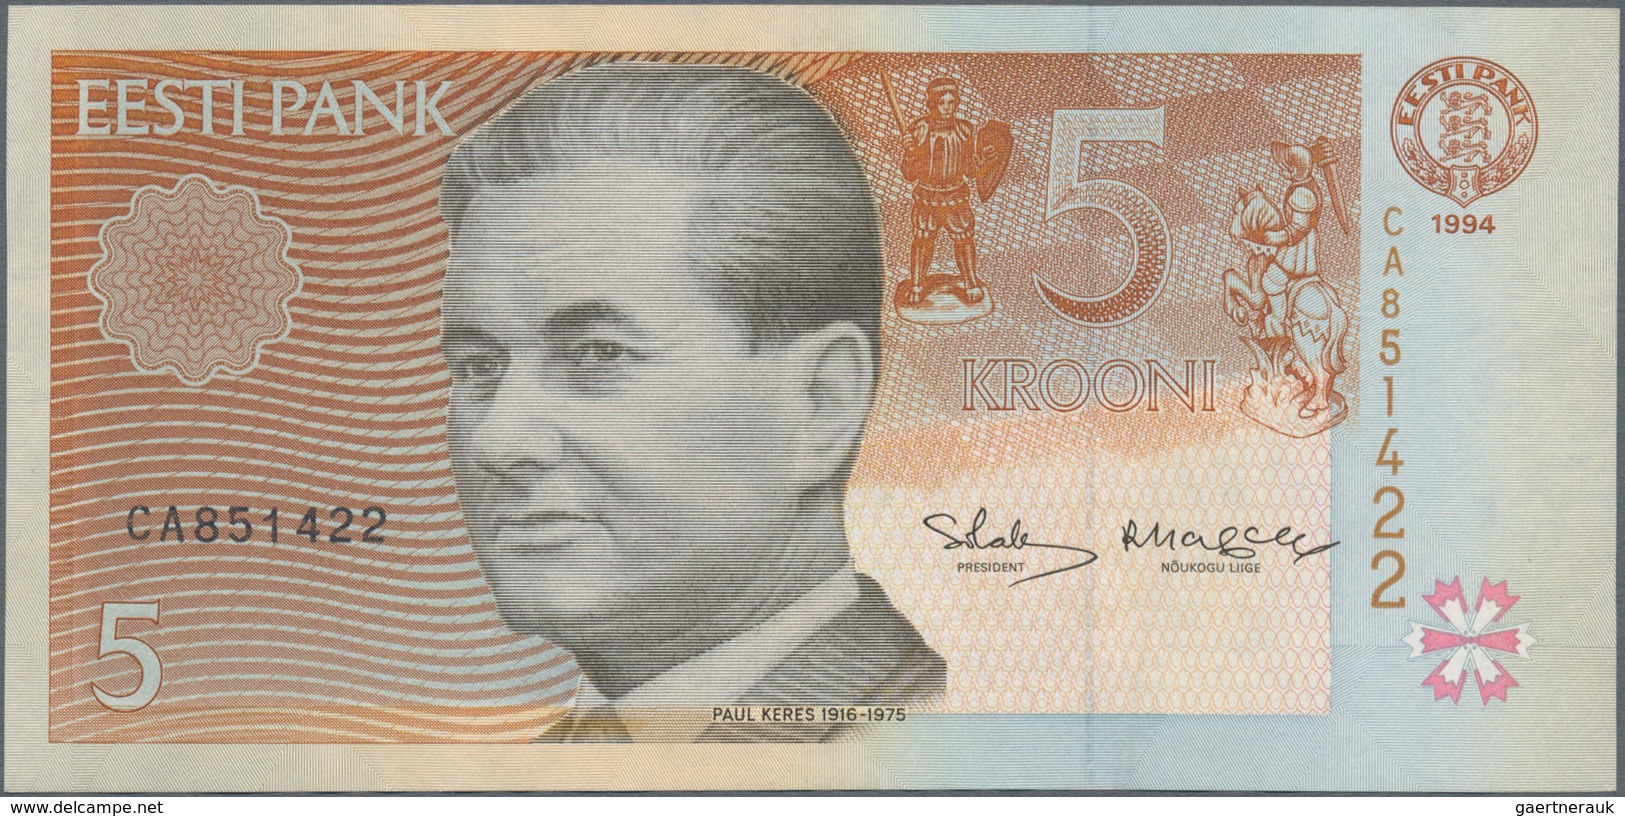 Estonia / Estland: Lot with 5 Banknotes series 1994 with 5, 10, 50, 100 and 500 Krooni, P.76a-80a, a